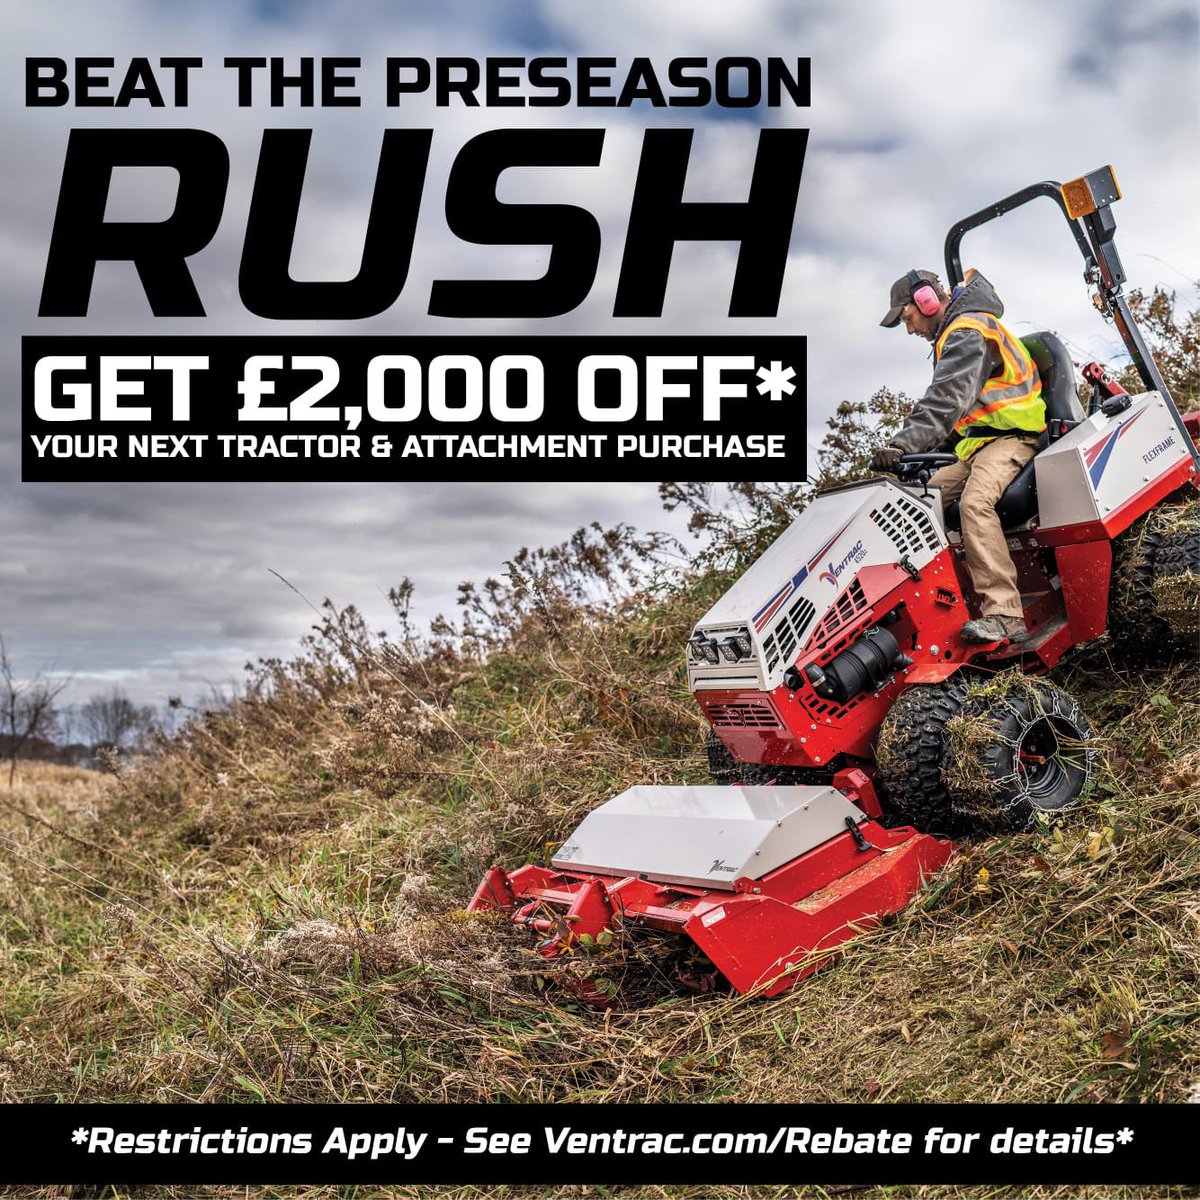 Looking to get a new Ventrac this year? Why not take advantage of this pre-season offer. Place an order and take delivery of a new 4520Y & an attachment this January to qualify @priceturfcare @BIGGALtd @thegma_ @BigVentracMan